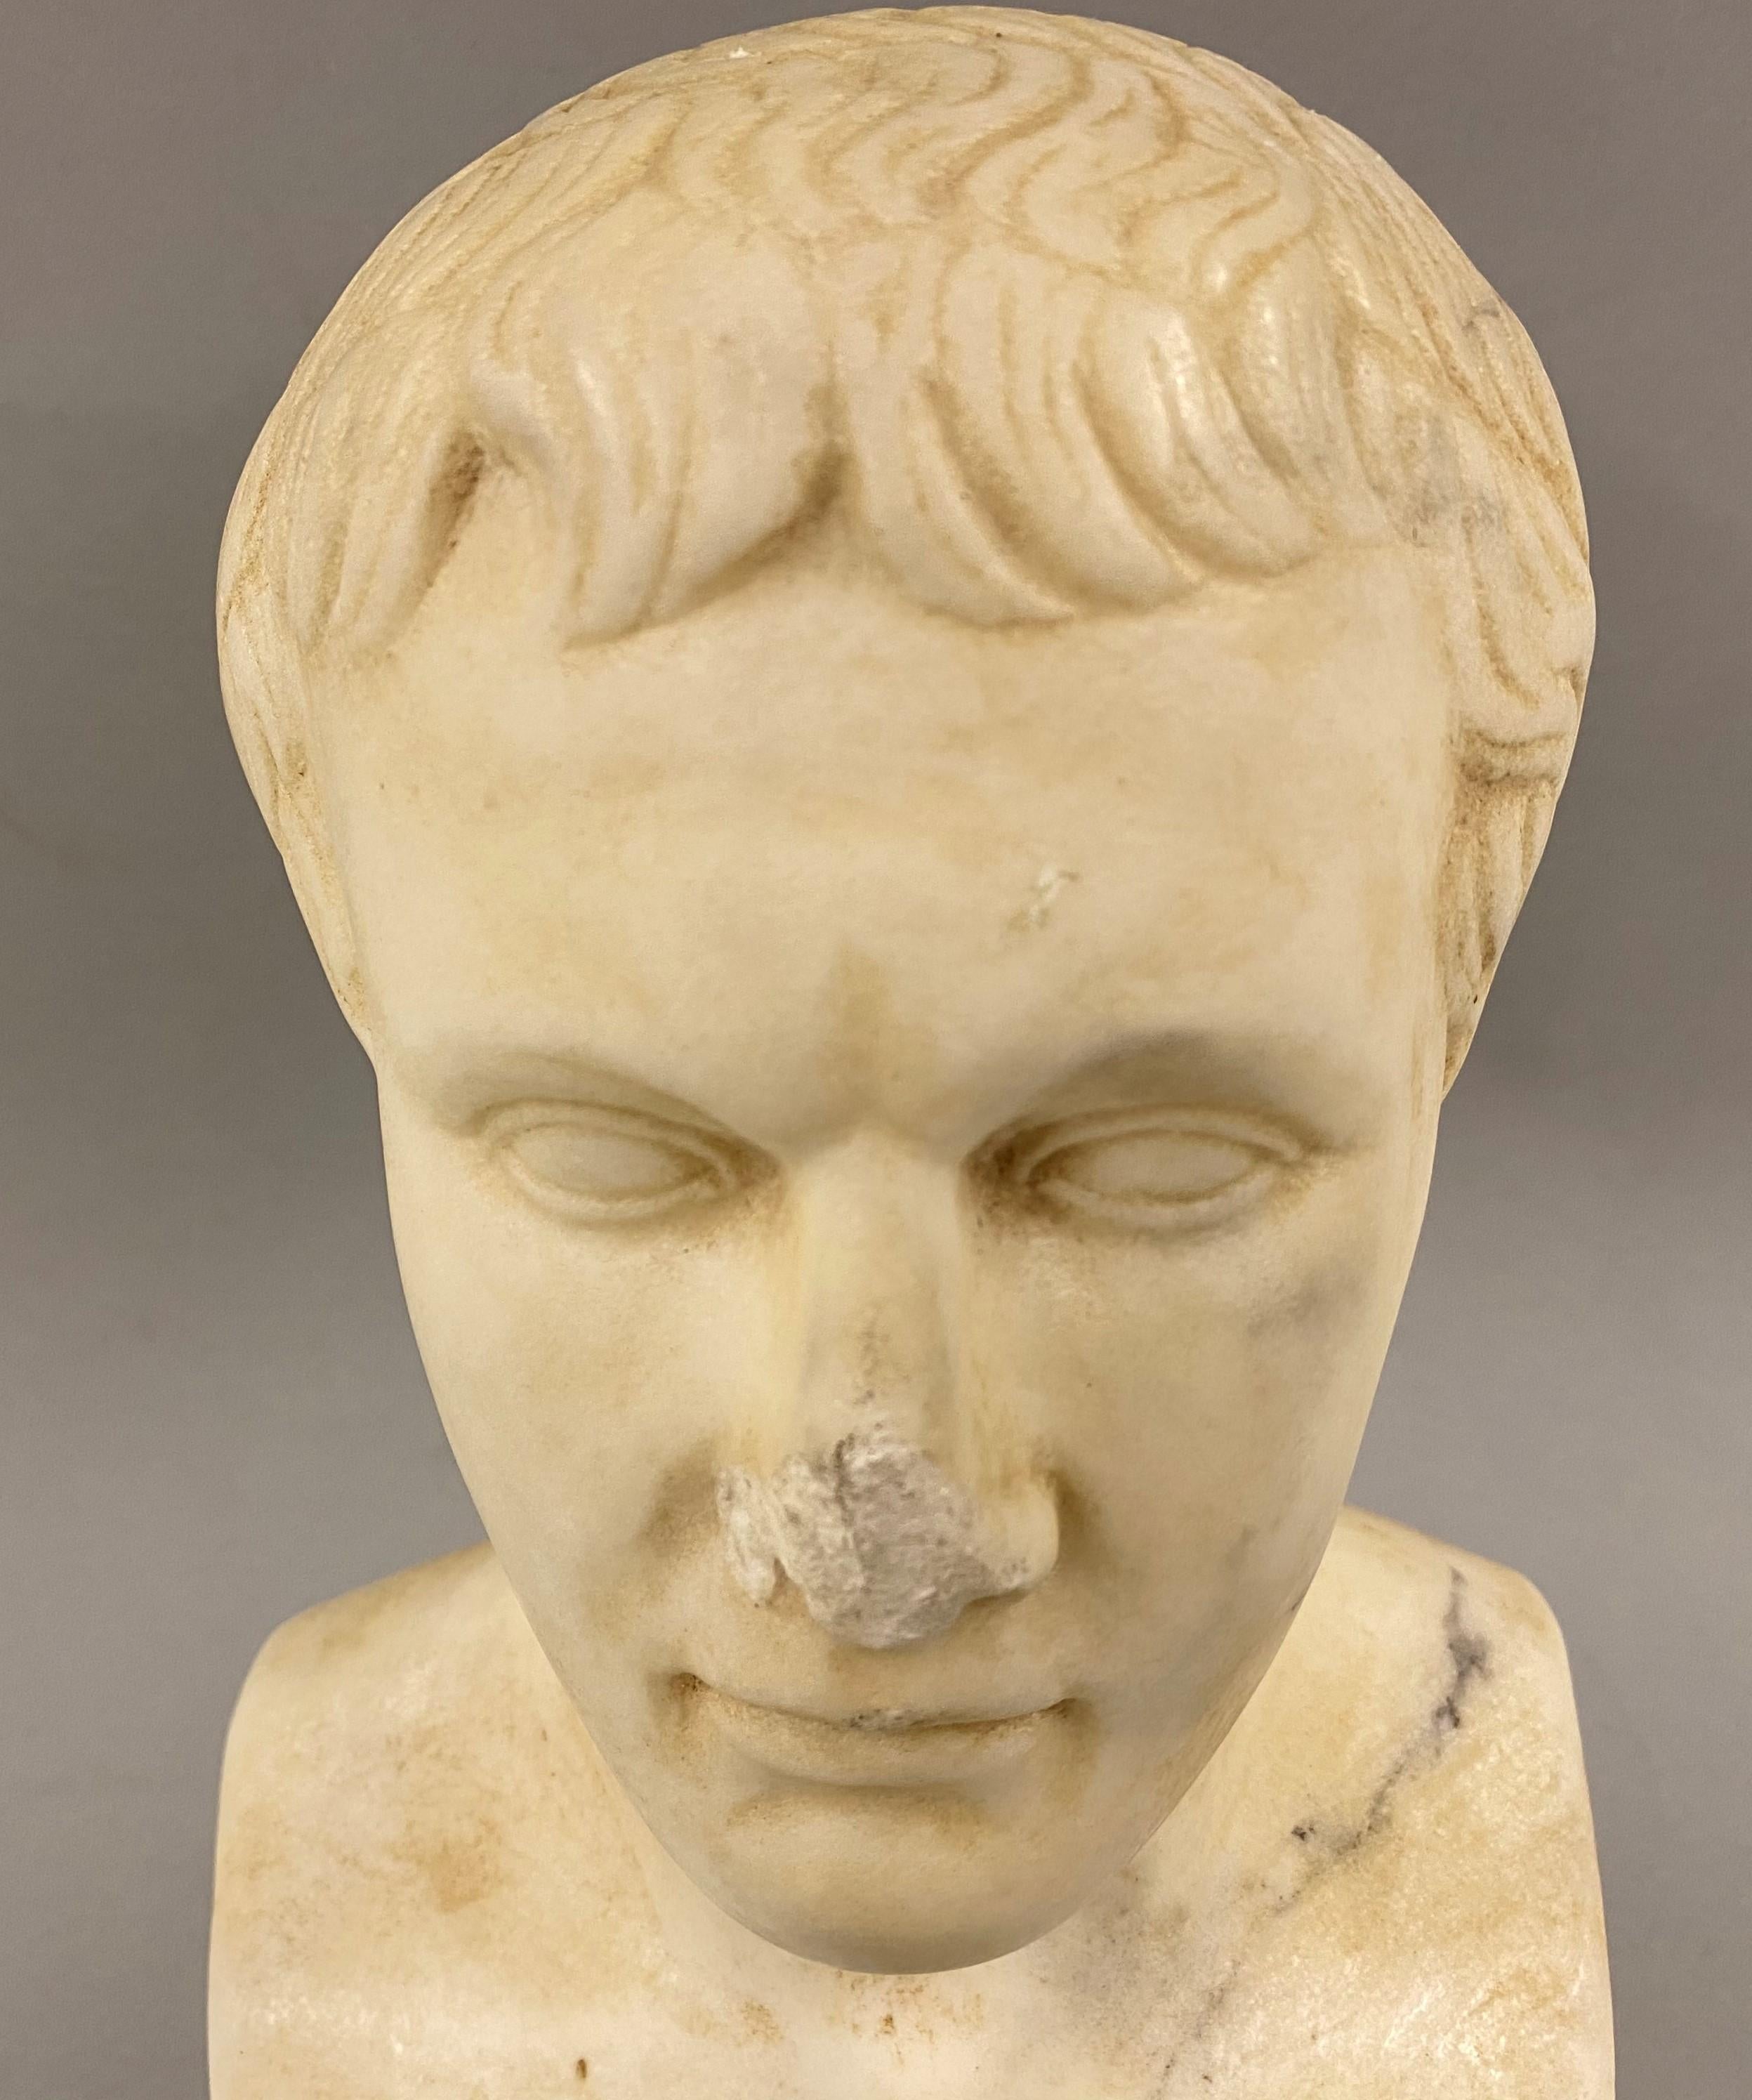 A fine example of a hand carved marble bust of Augustus Caesar with concretions and other evidence of long-term burial suggesting its origin as ancient Rome, probably dating to the second century AD. The bust is unsigned, in very good condition,